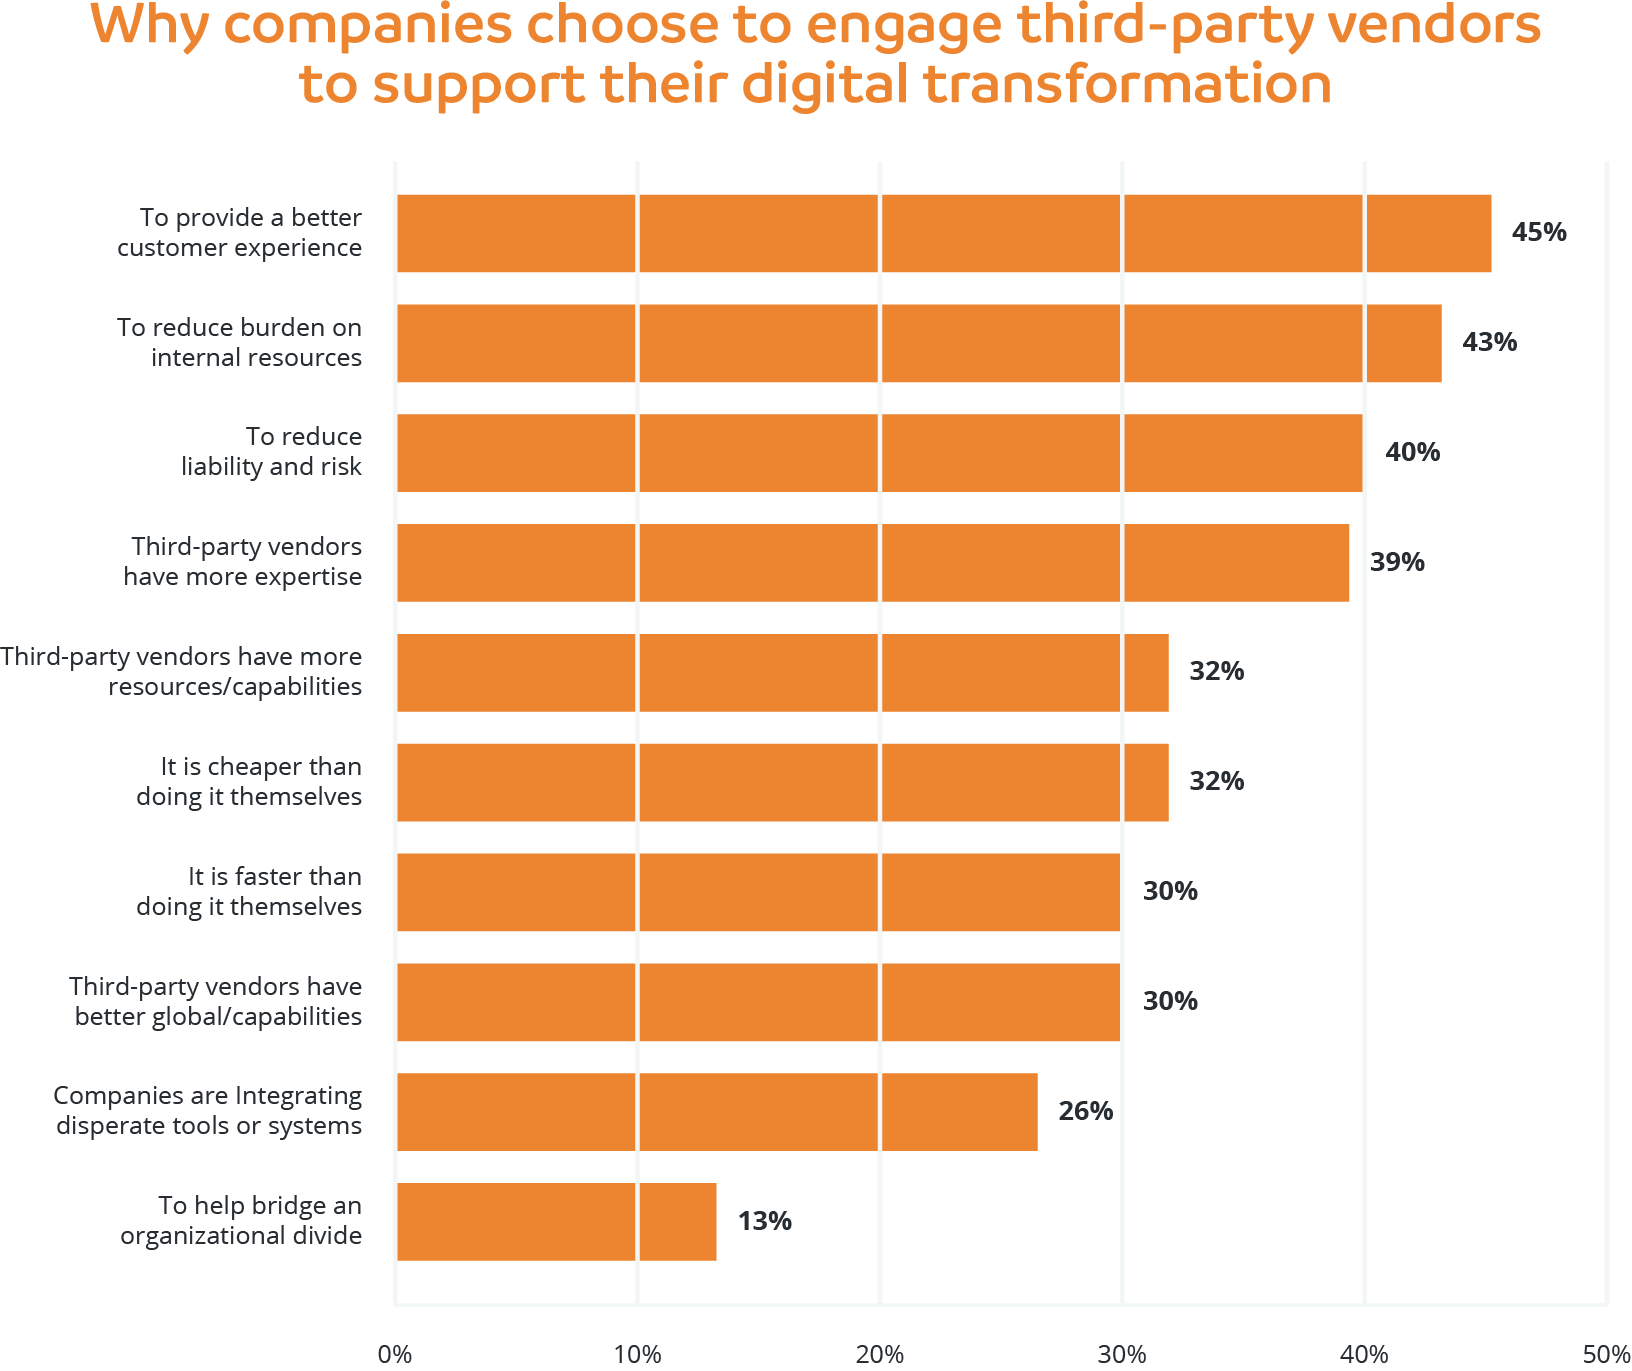 Why companies choose to engage third-party vendors to support their digital transformation